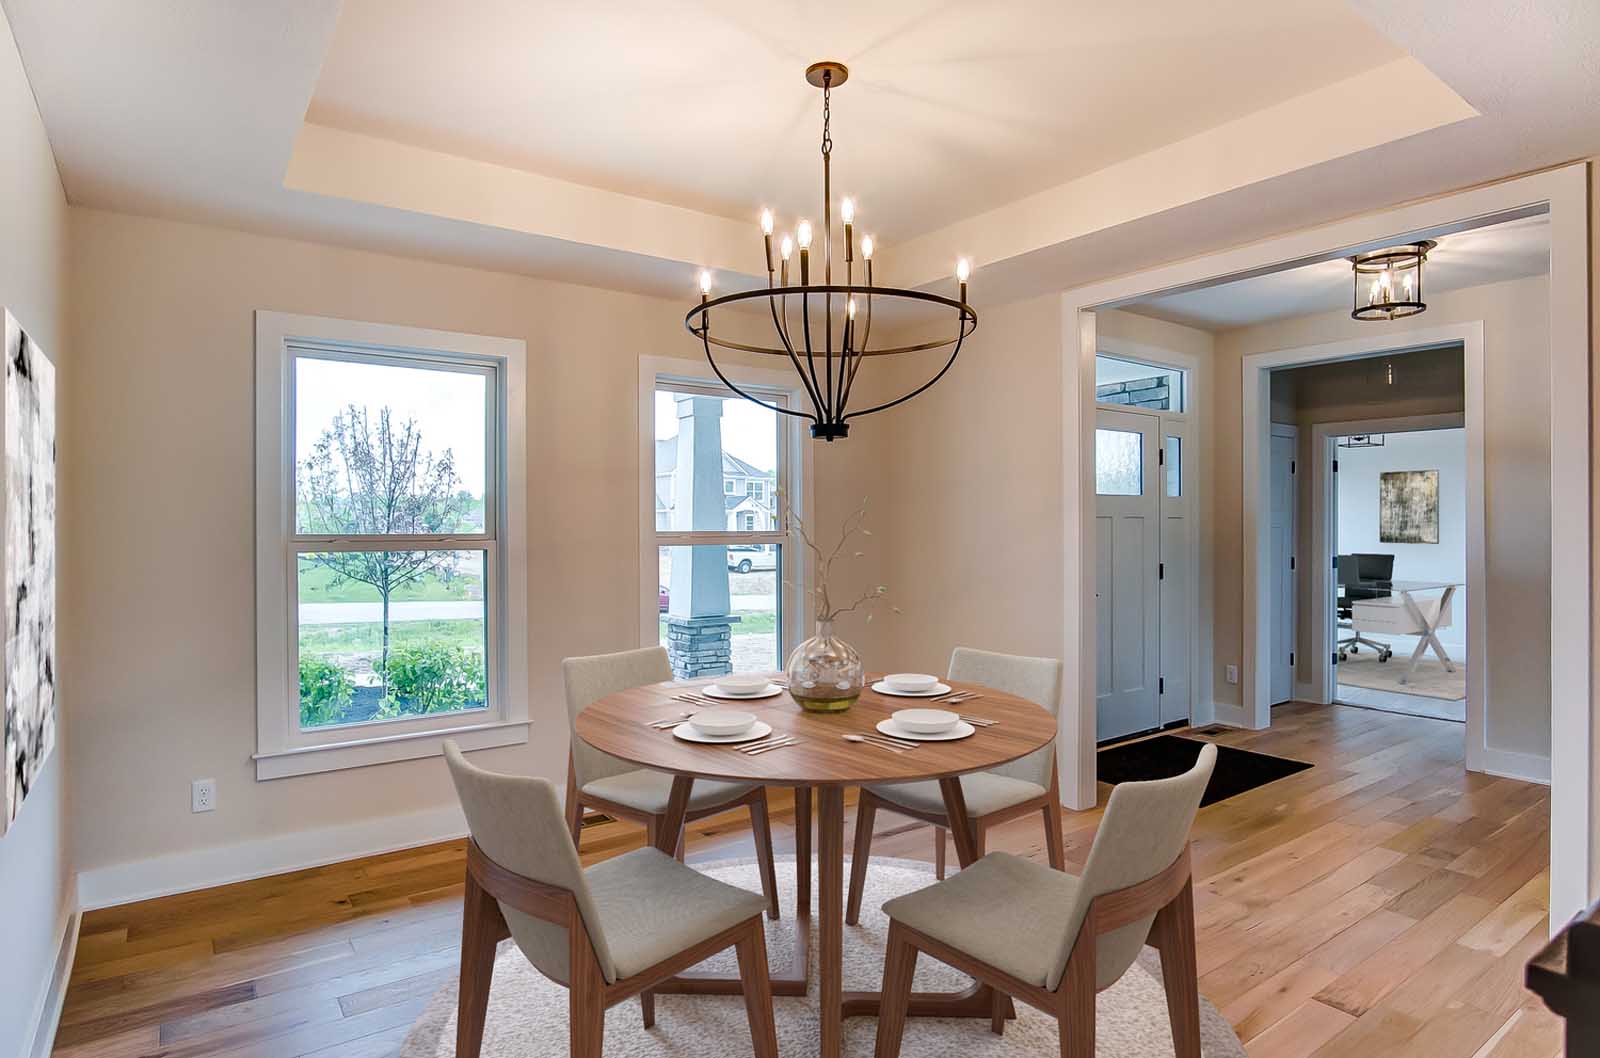 Design Homes The Triple Crown dining room